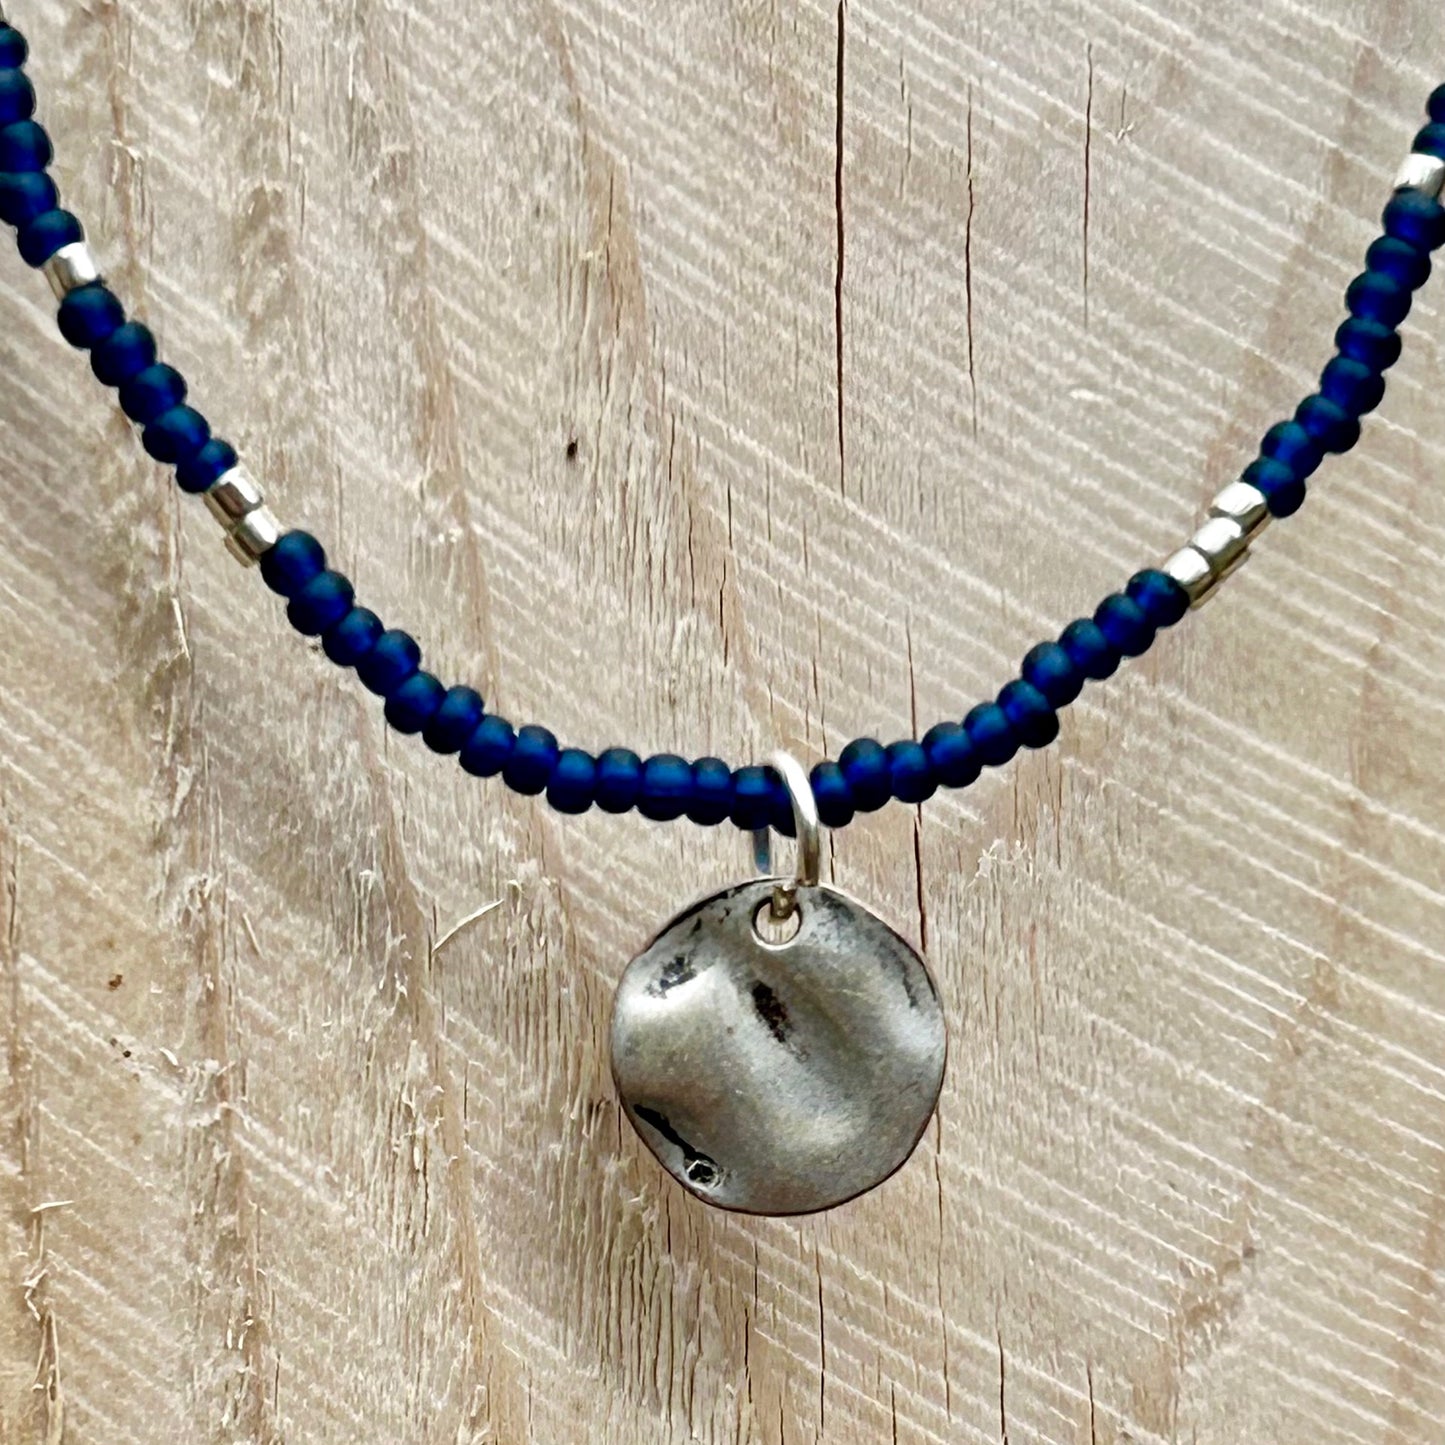 Navy Blue Boho Seed Bead Necklace with Silver & Coin Charm